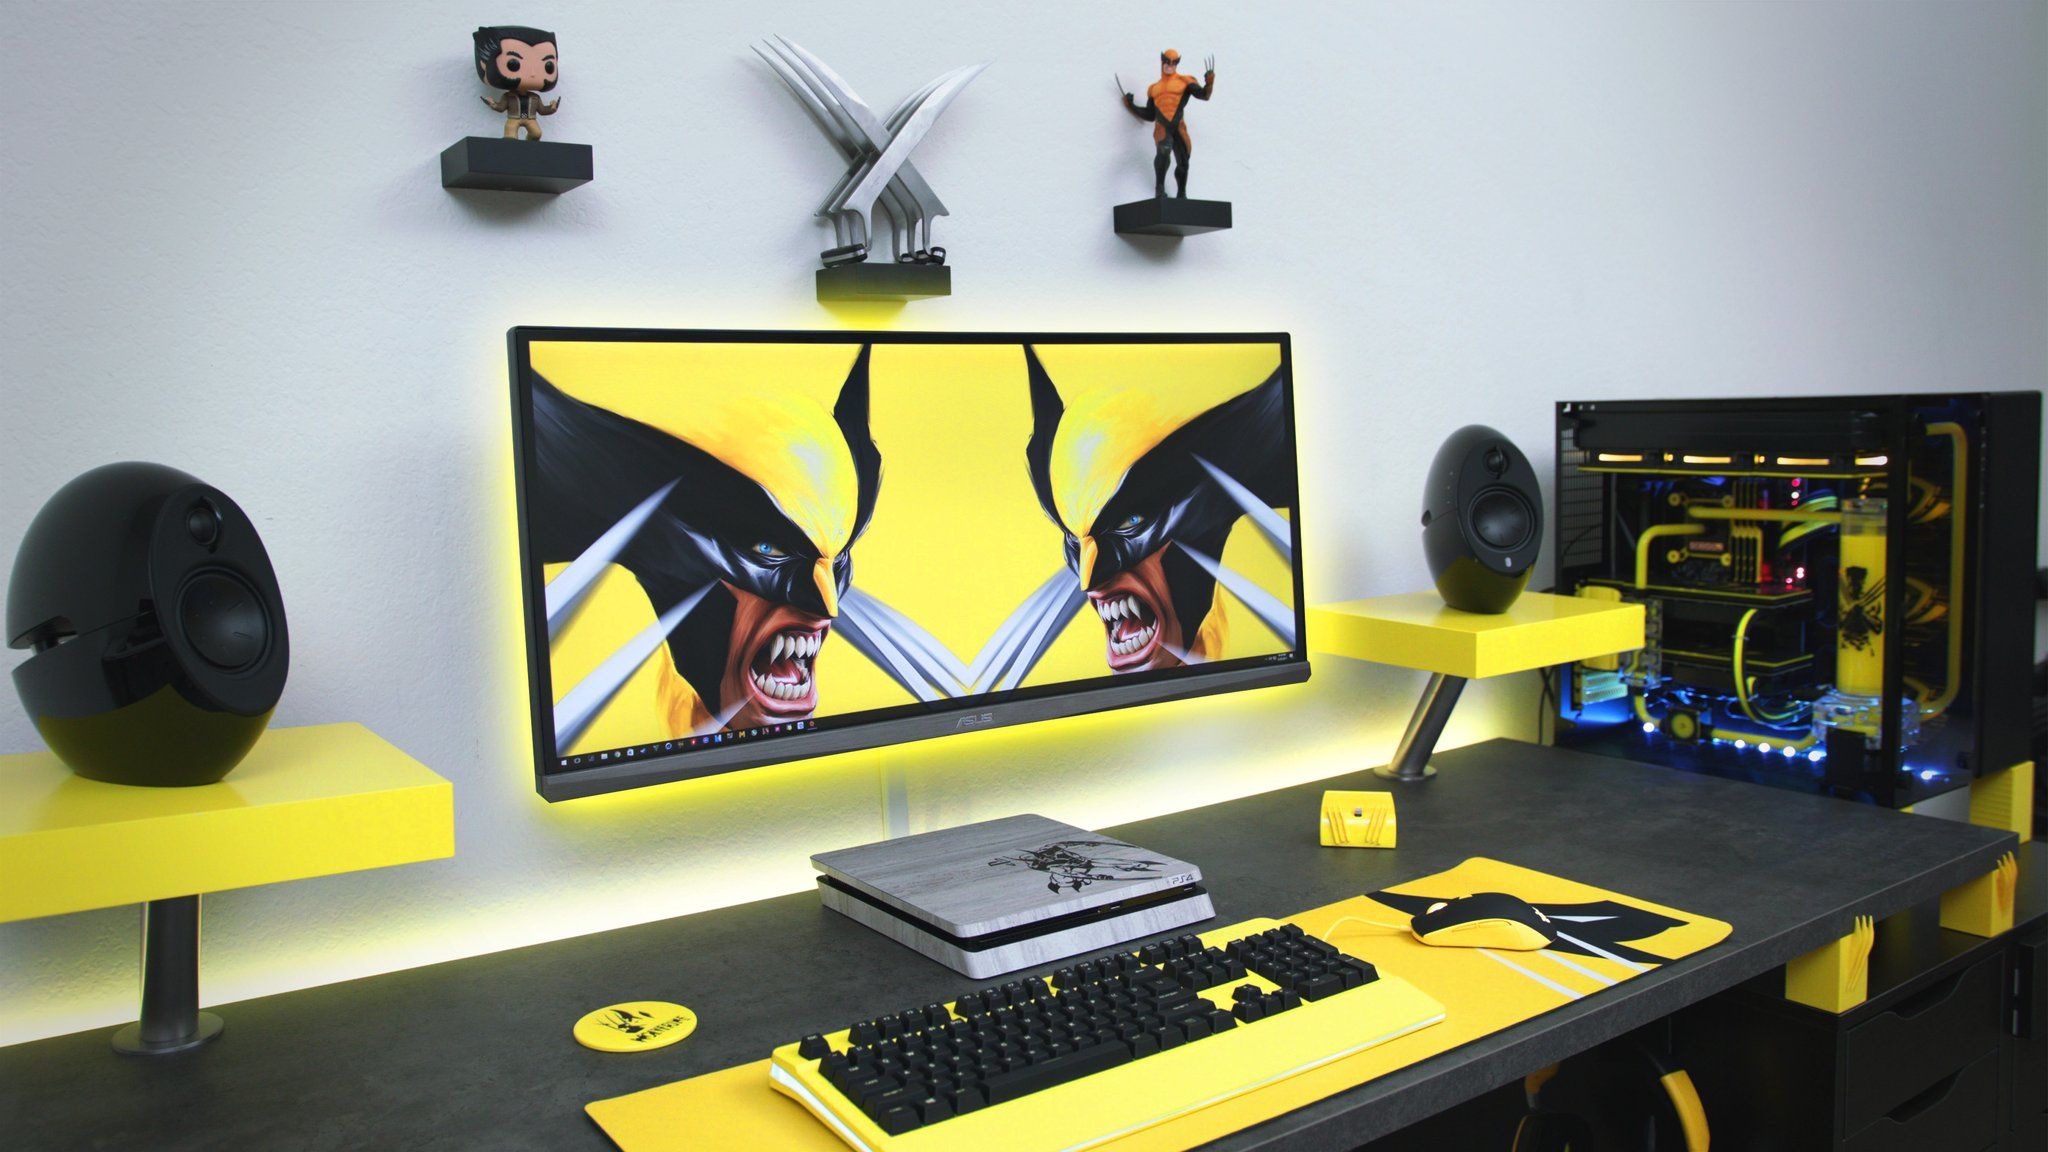 Gaming room decor with yellow color